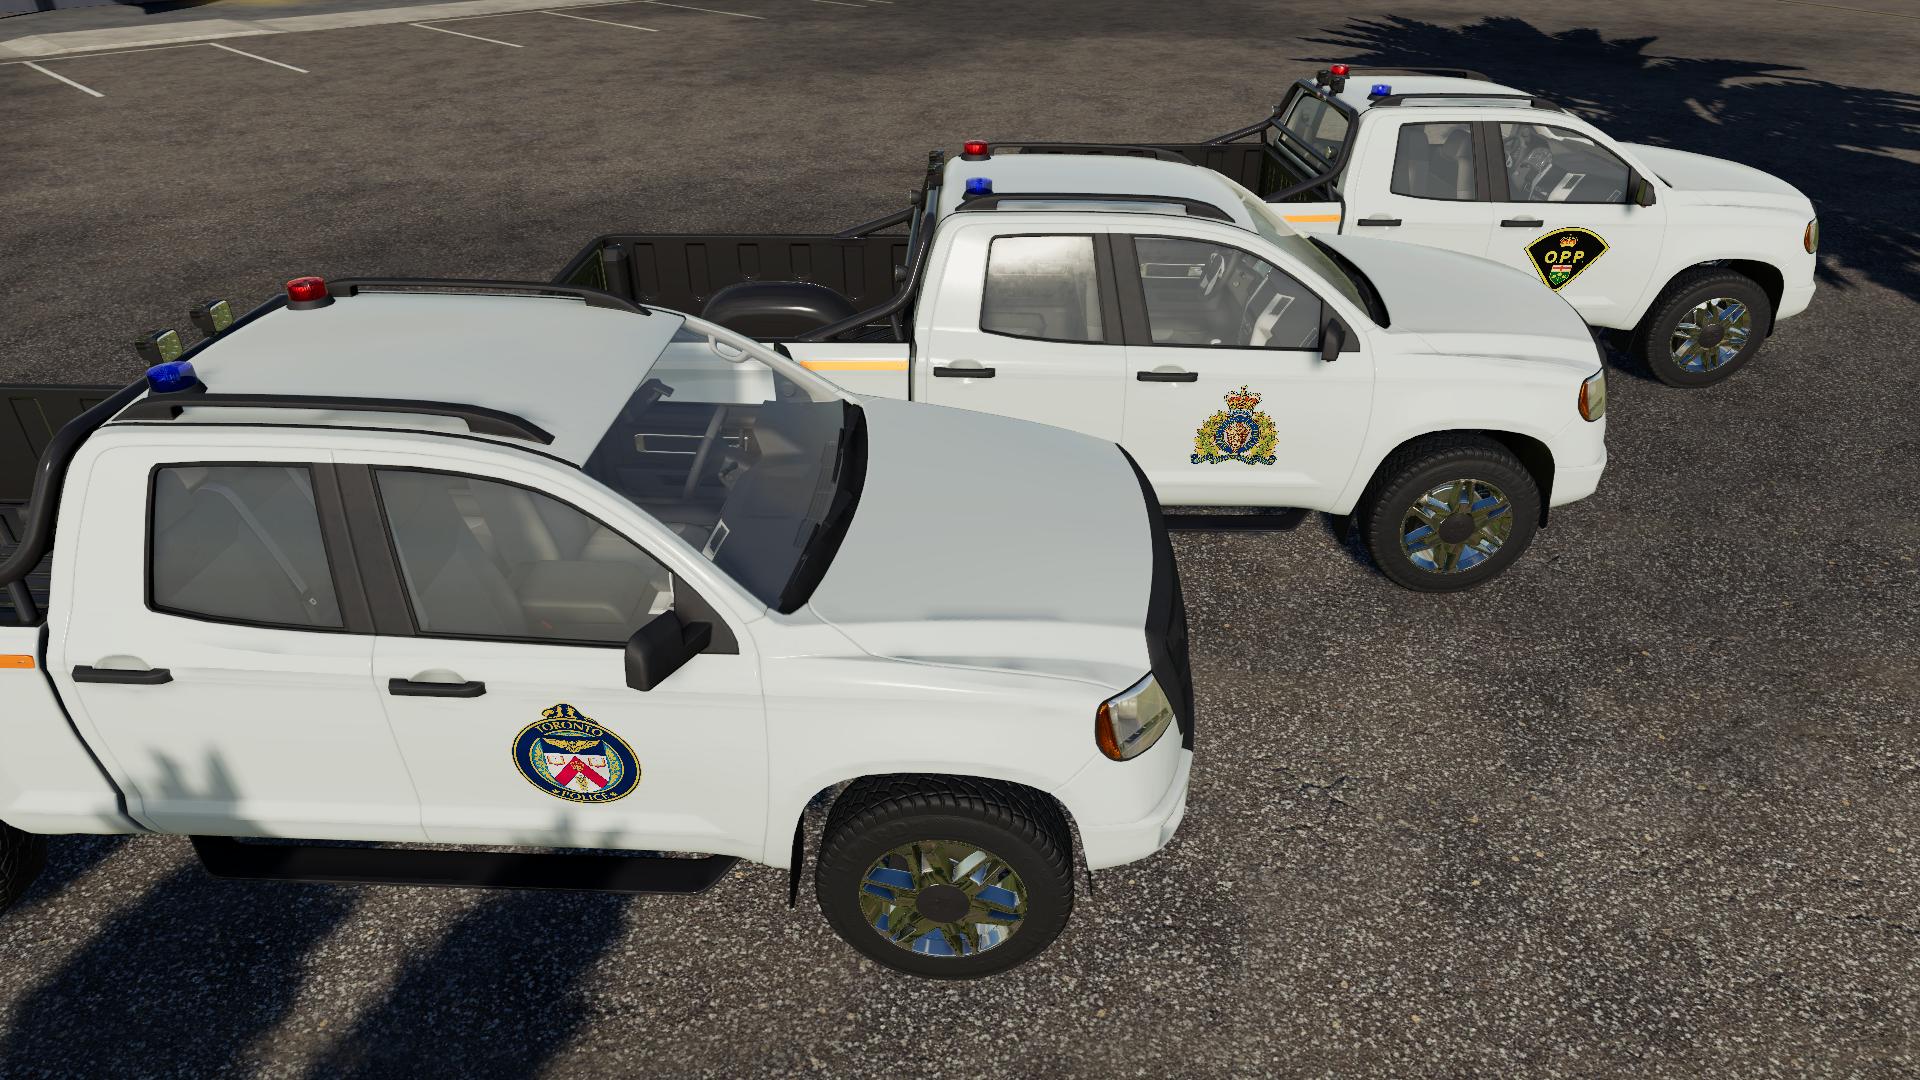 Pickup 2014 Police Edition By Deltabravo Productions